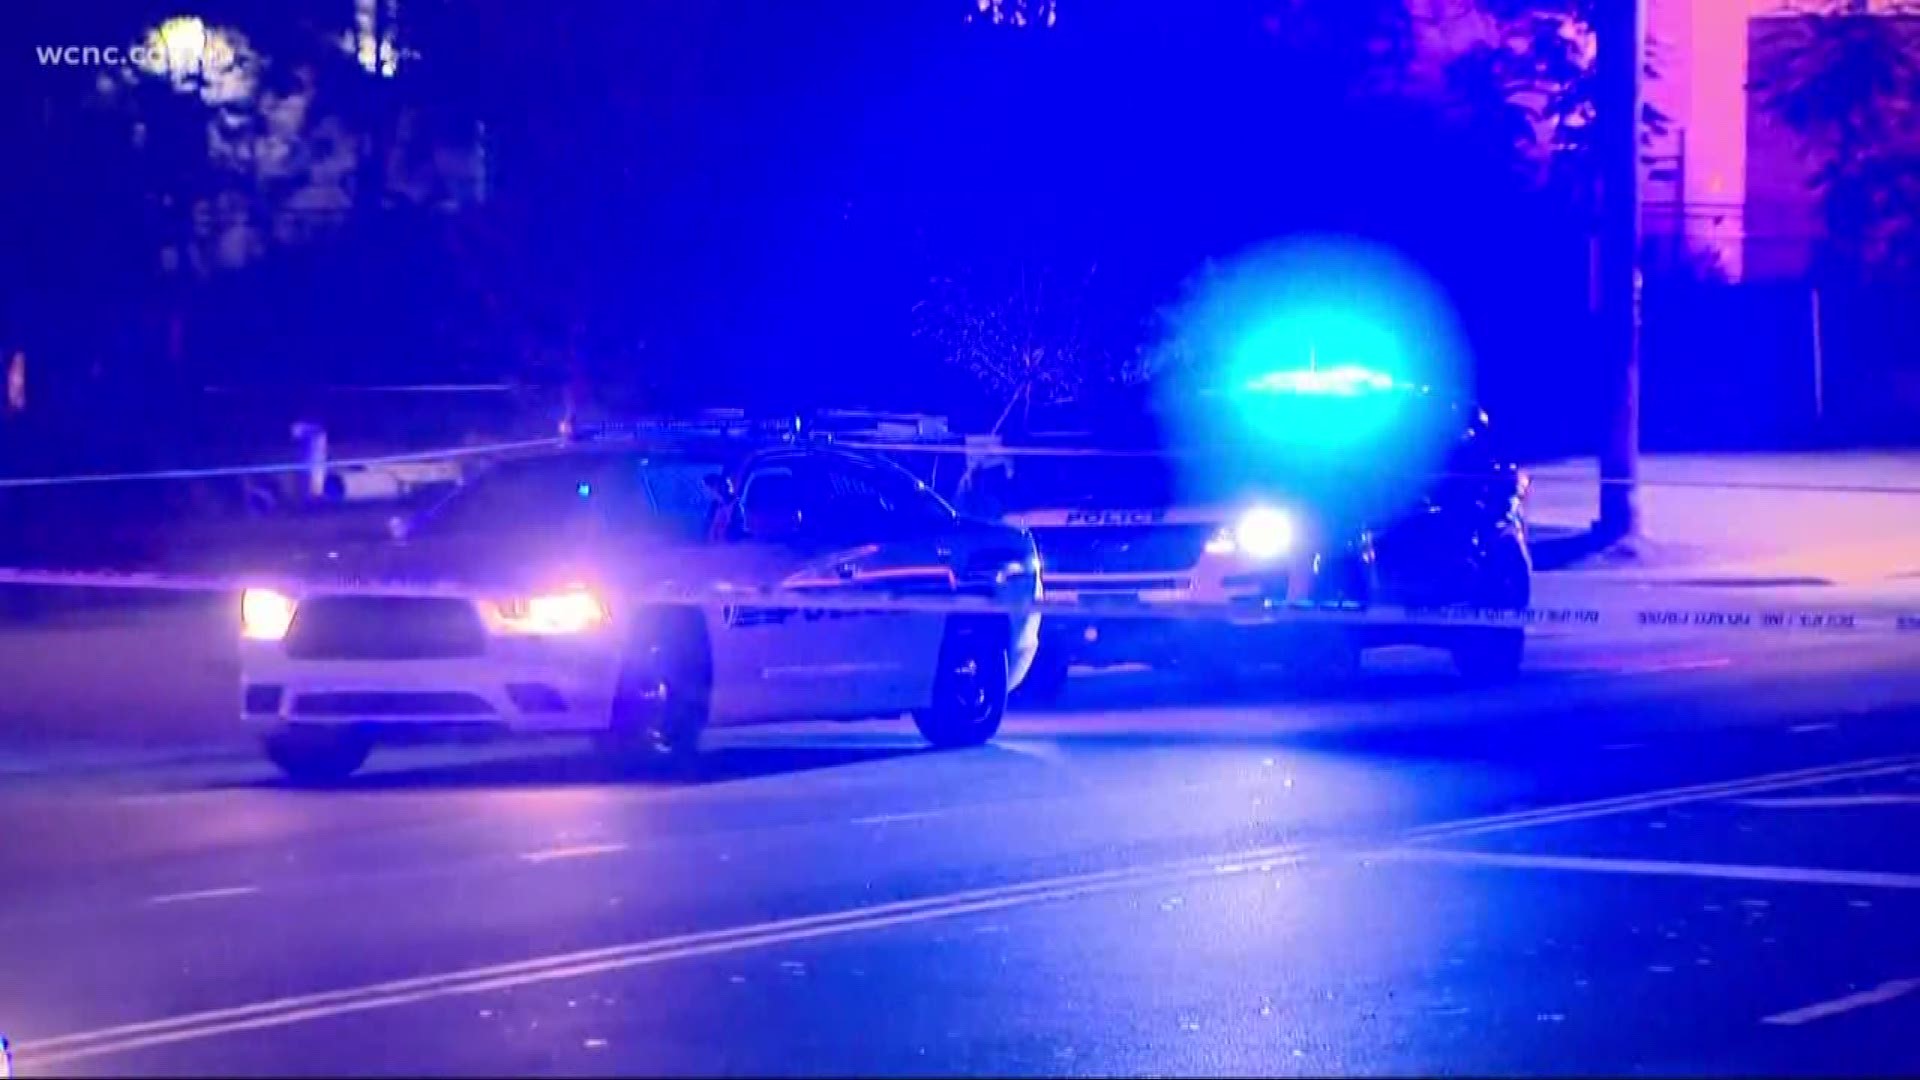 Police say an argument led to a shooting in Plaza Midwood early Wednesday morning.